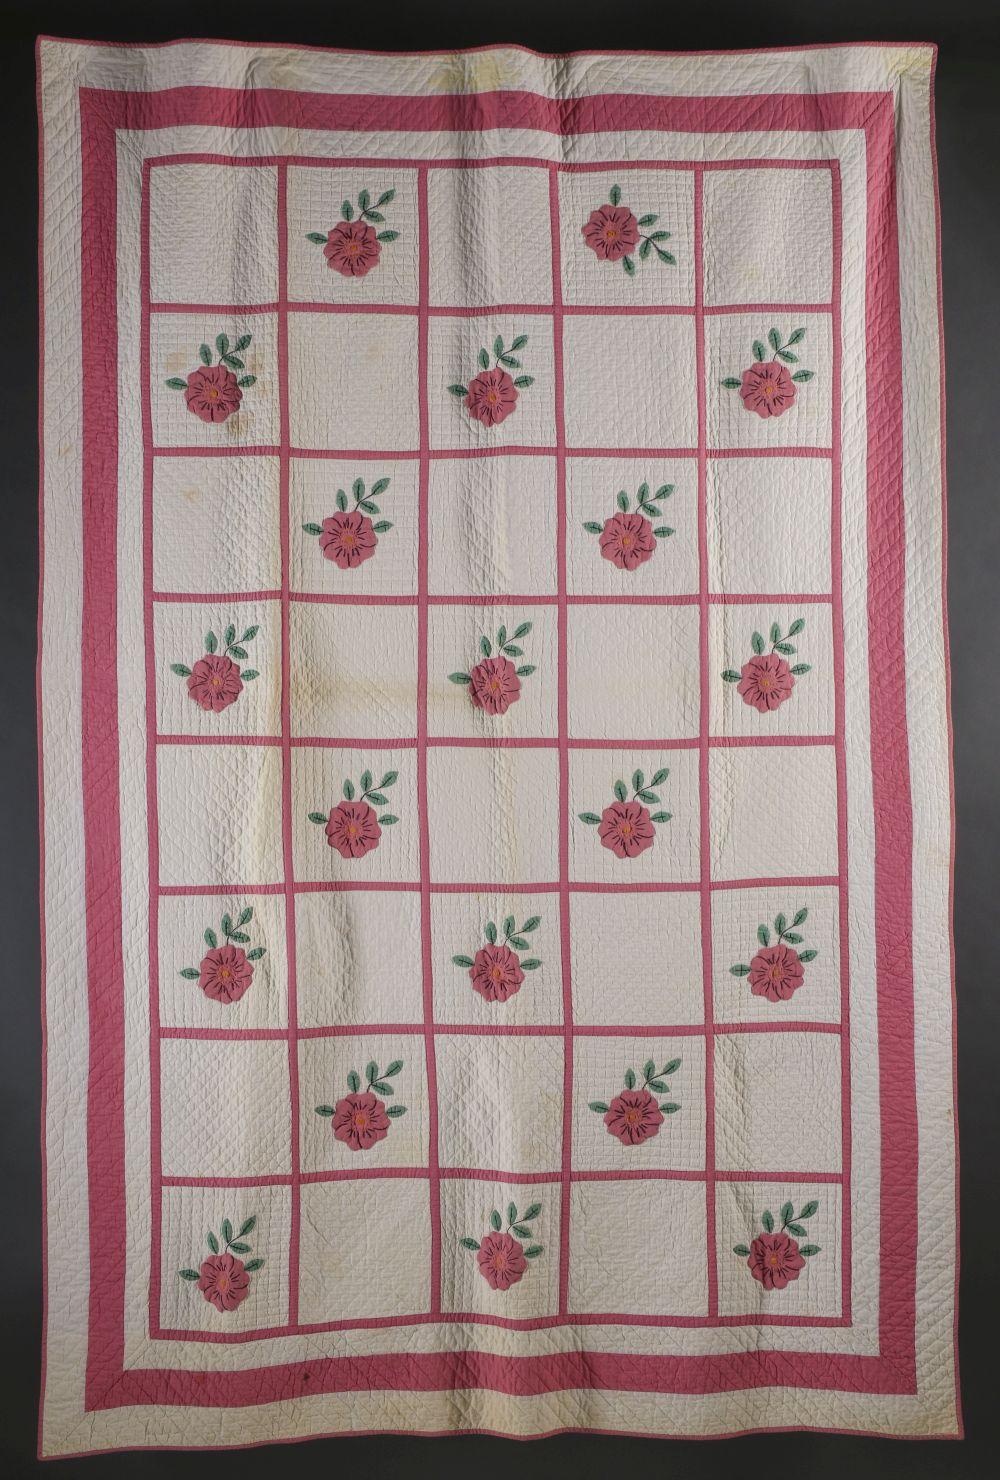 A VINTAGE APPLIQUE QUILT WITH ROSES